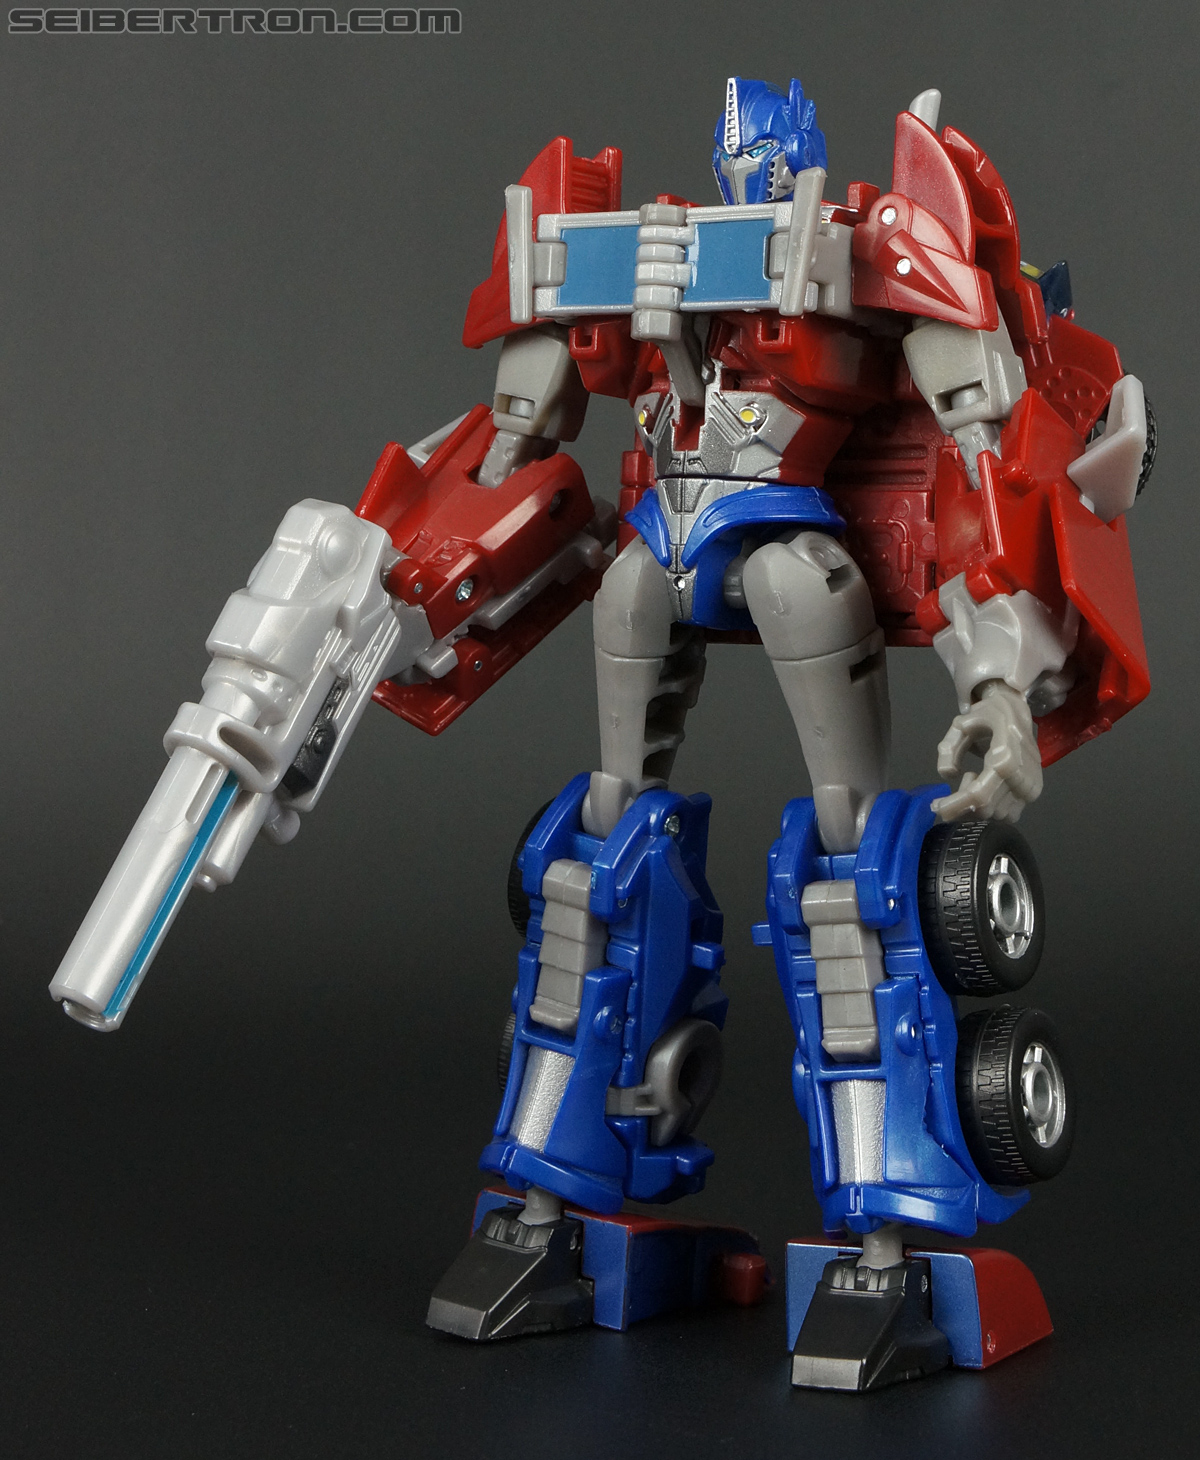 Transformers Prime: First Edition Optimus Prime (Image #57 of 135)